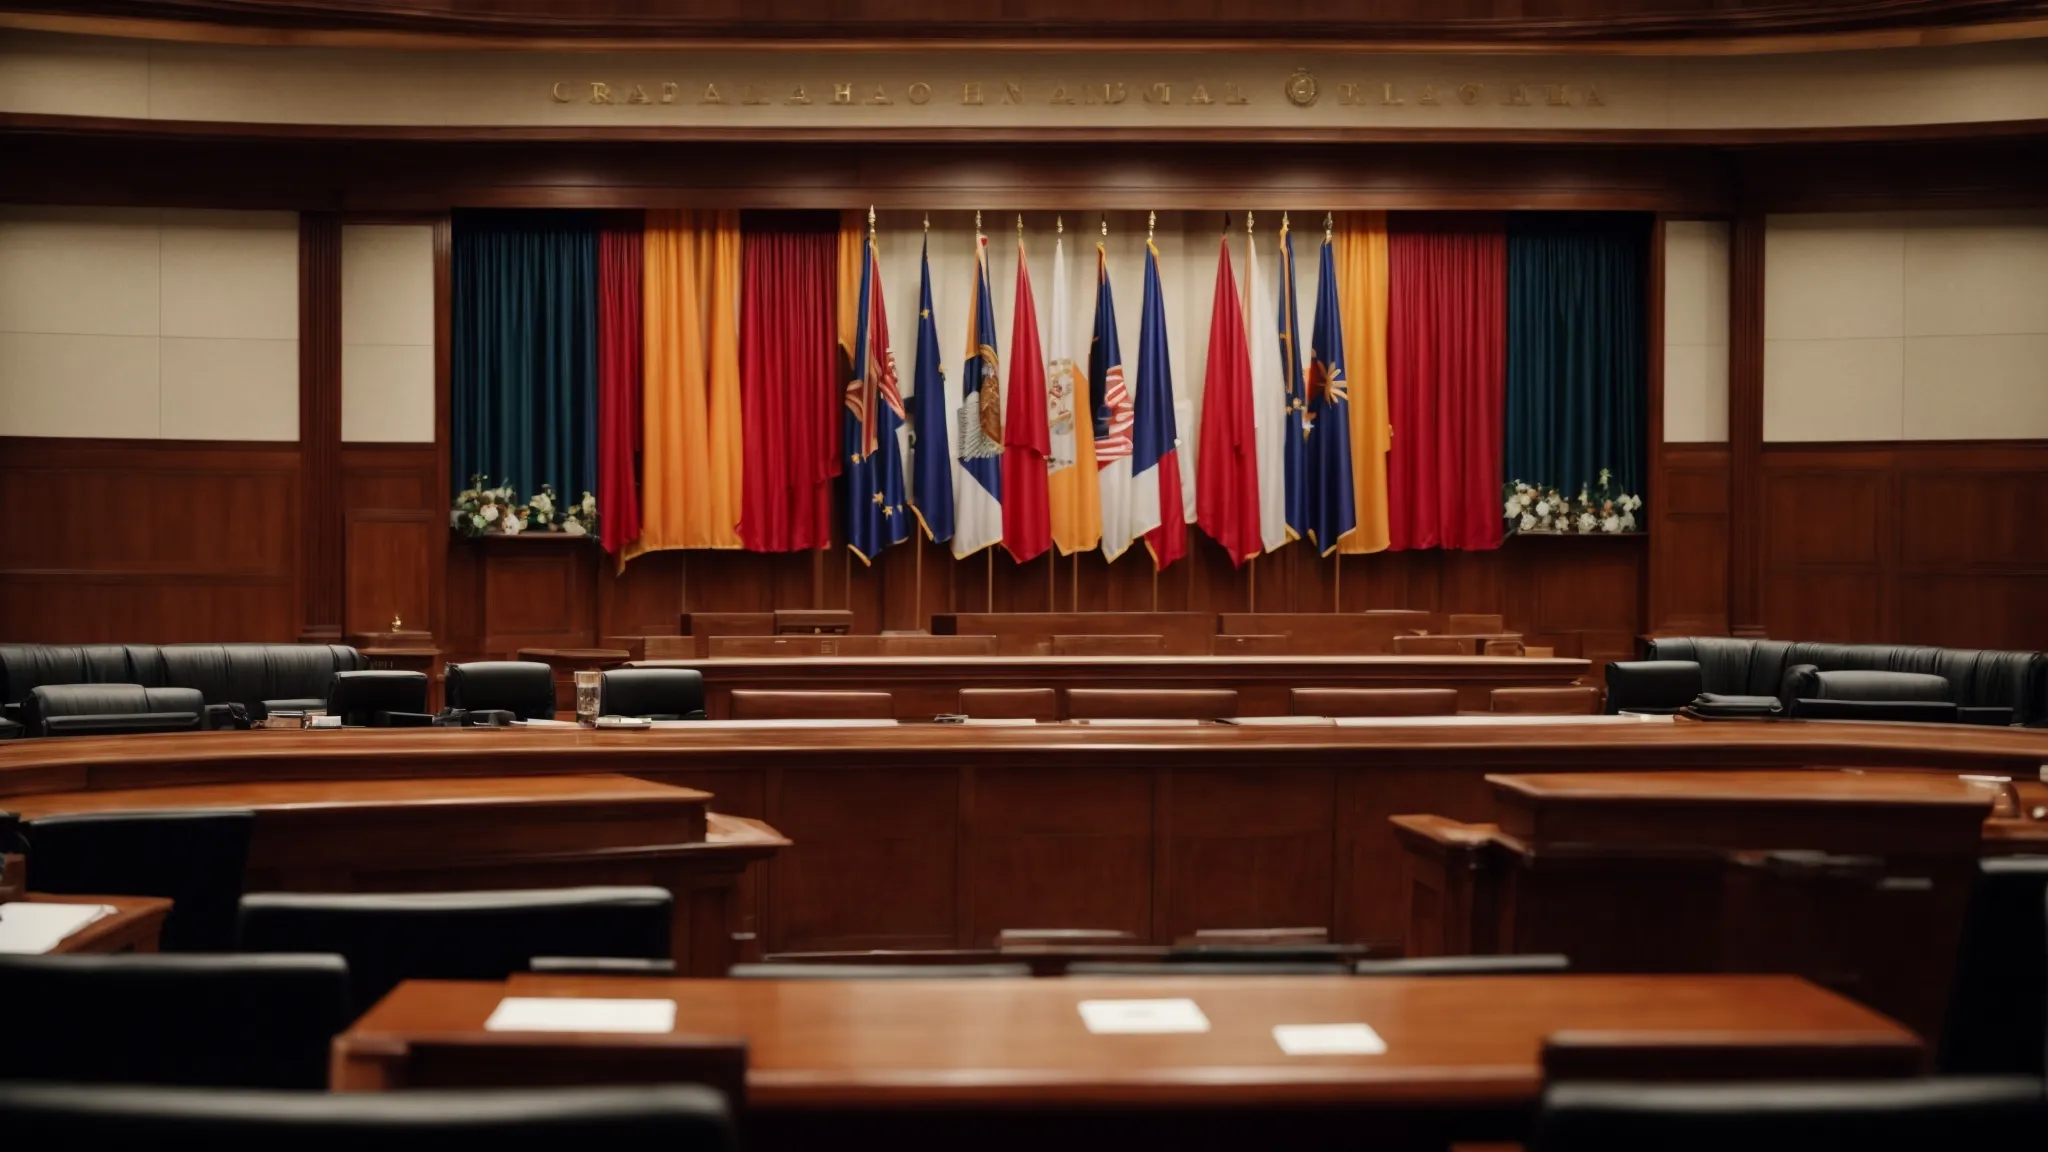 a grand courtroom with nation-state flags surrounding a central arbitration table where various legal professionals deliberate.